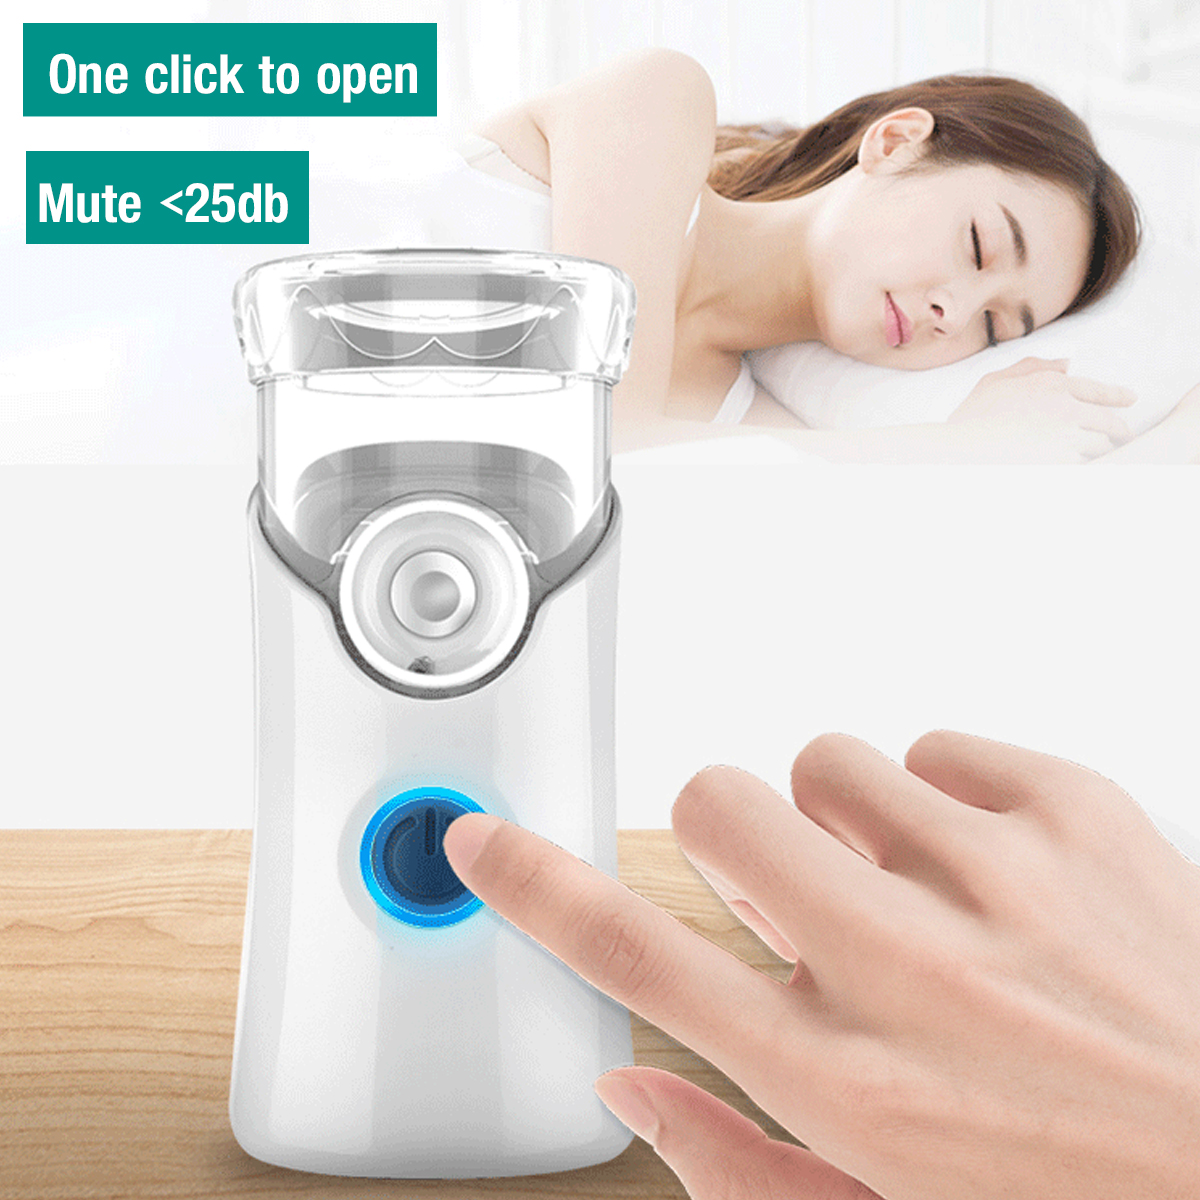 5V-Portable-Mini-Ultrasonic-Handheld-Atomizer-USB-Charging-Low-Noise-Air-Humidifier-for-Adult-Kids-1763414-4